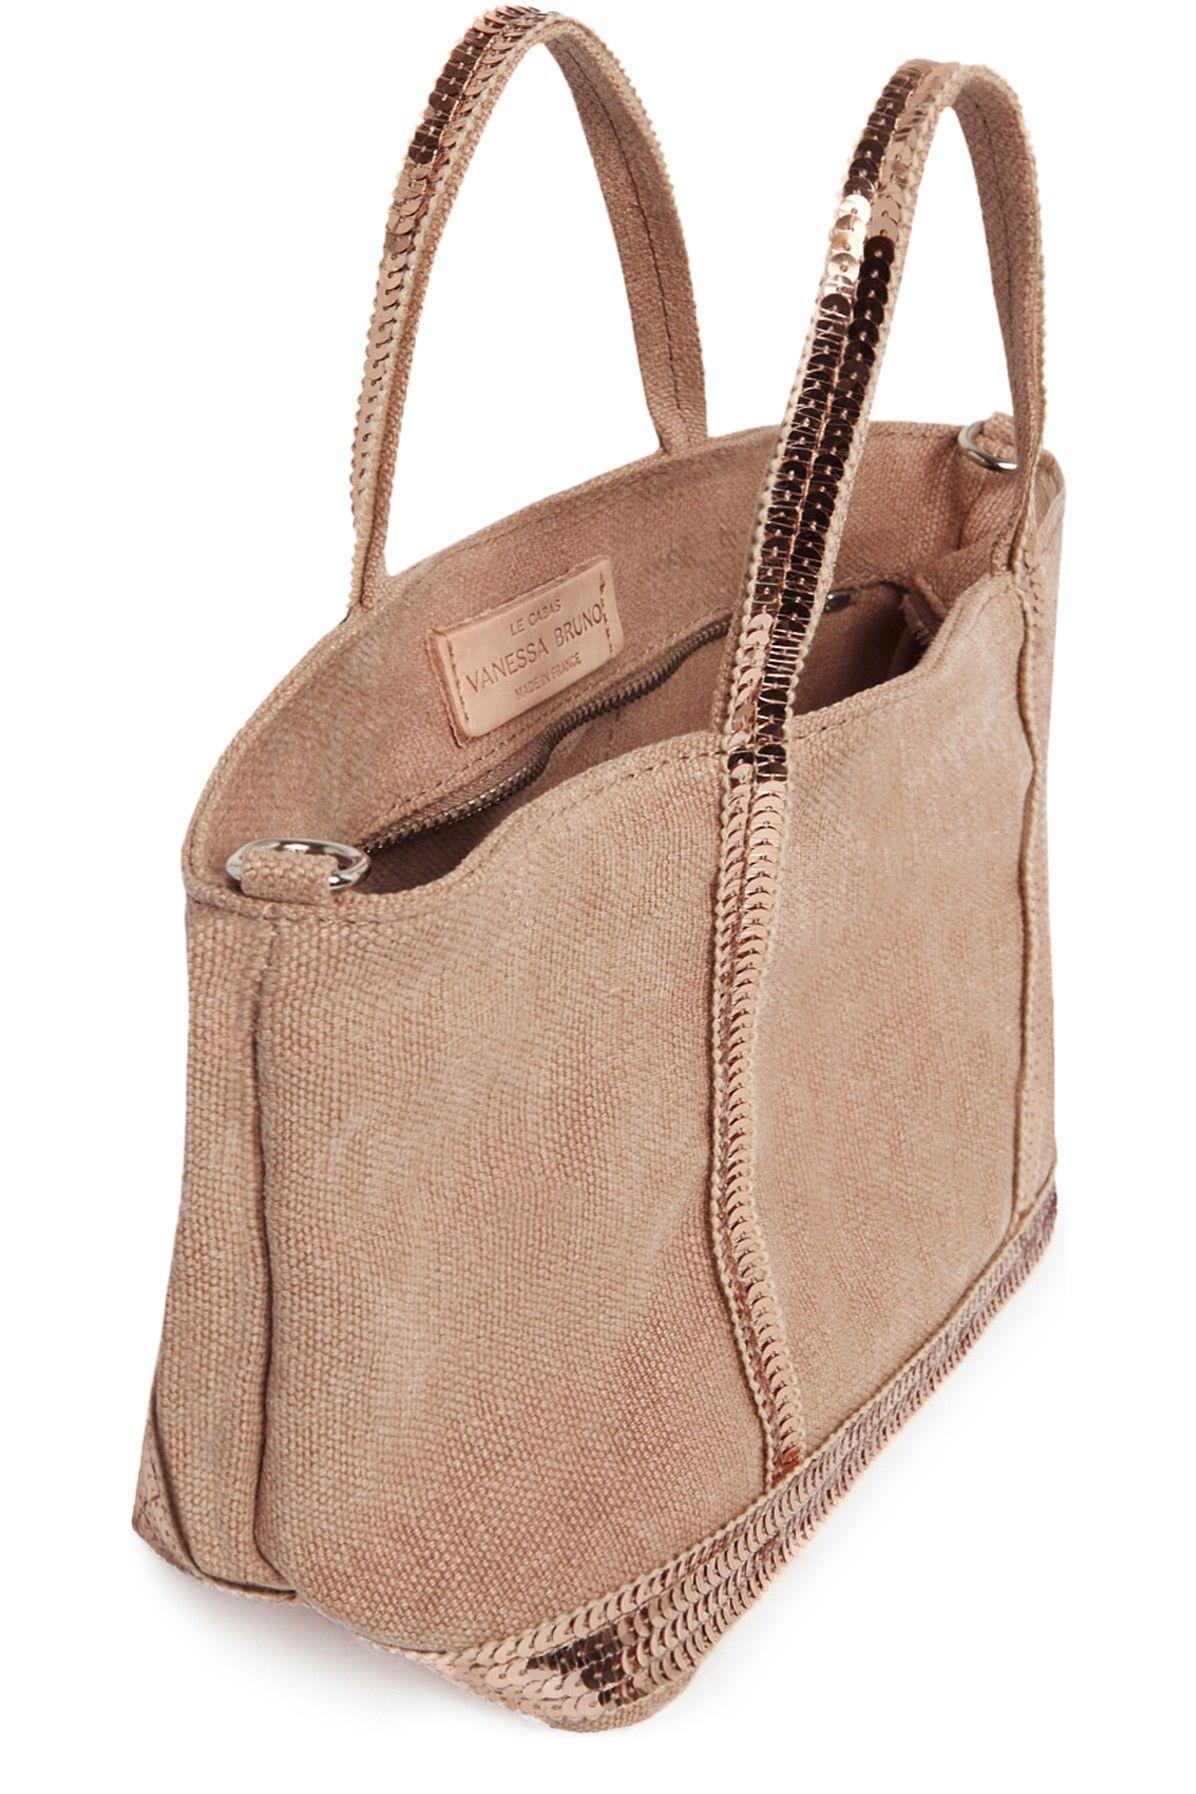 Vanessa Bruno Linen Xs Cabas Tote Bag in Natural | Lyst